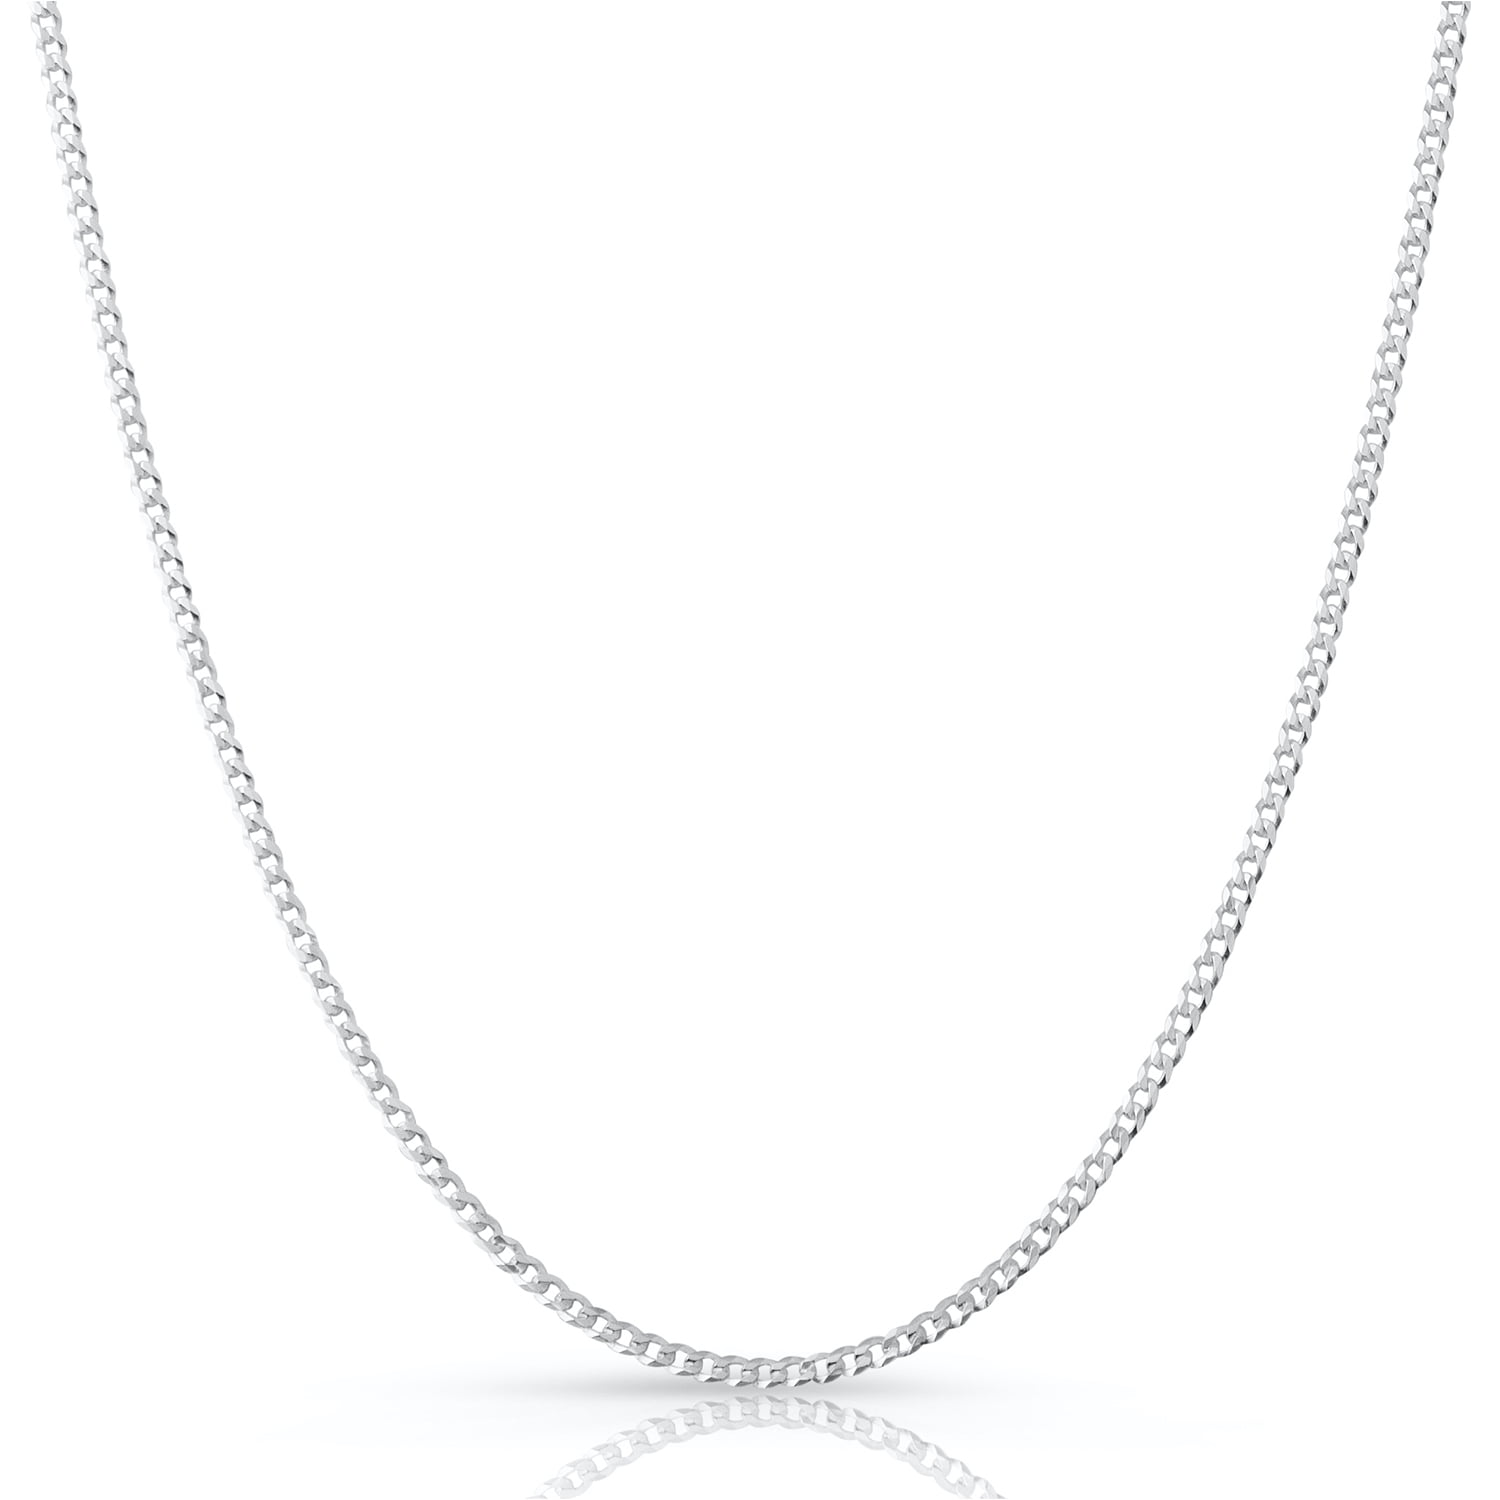 Sterling Silver Diamond-Cut Curb 2MM-10.5MM ITProLux Chain Necklace, Solid 925 Italy, 16-30 Inch, Next Level Jewelry